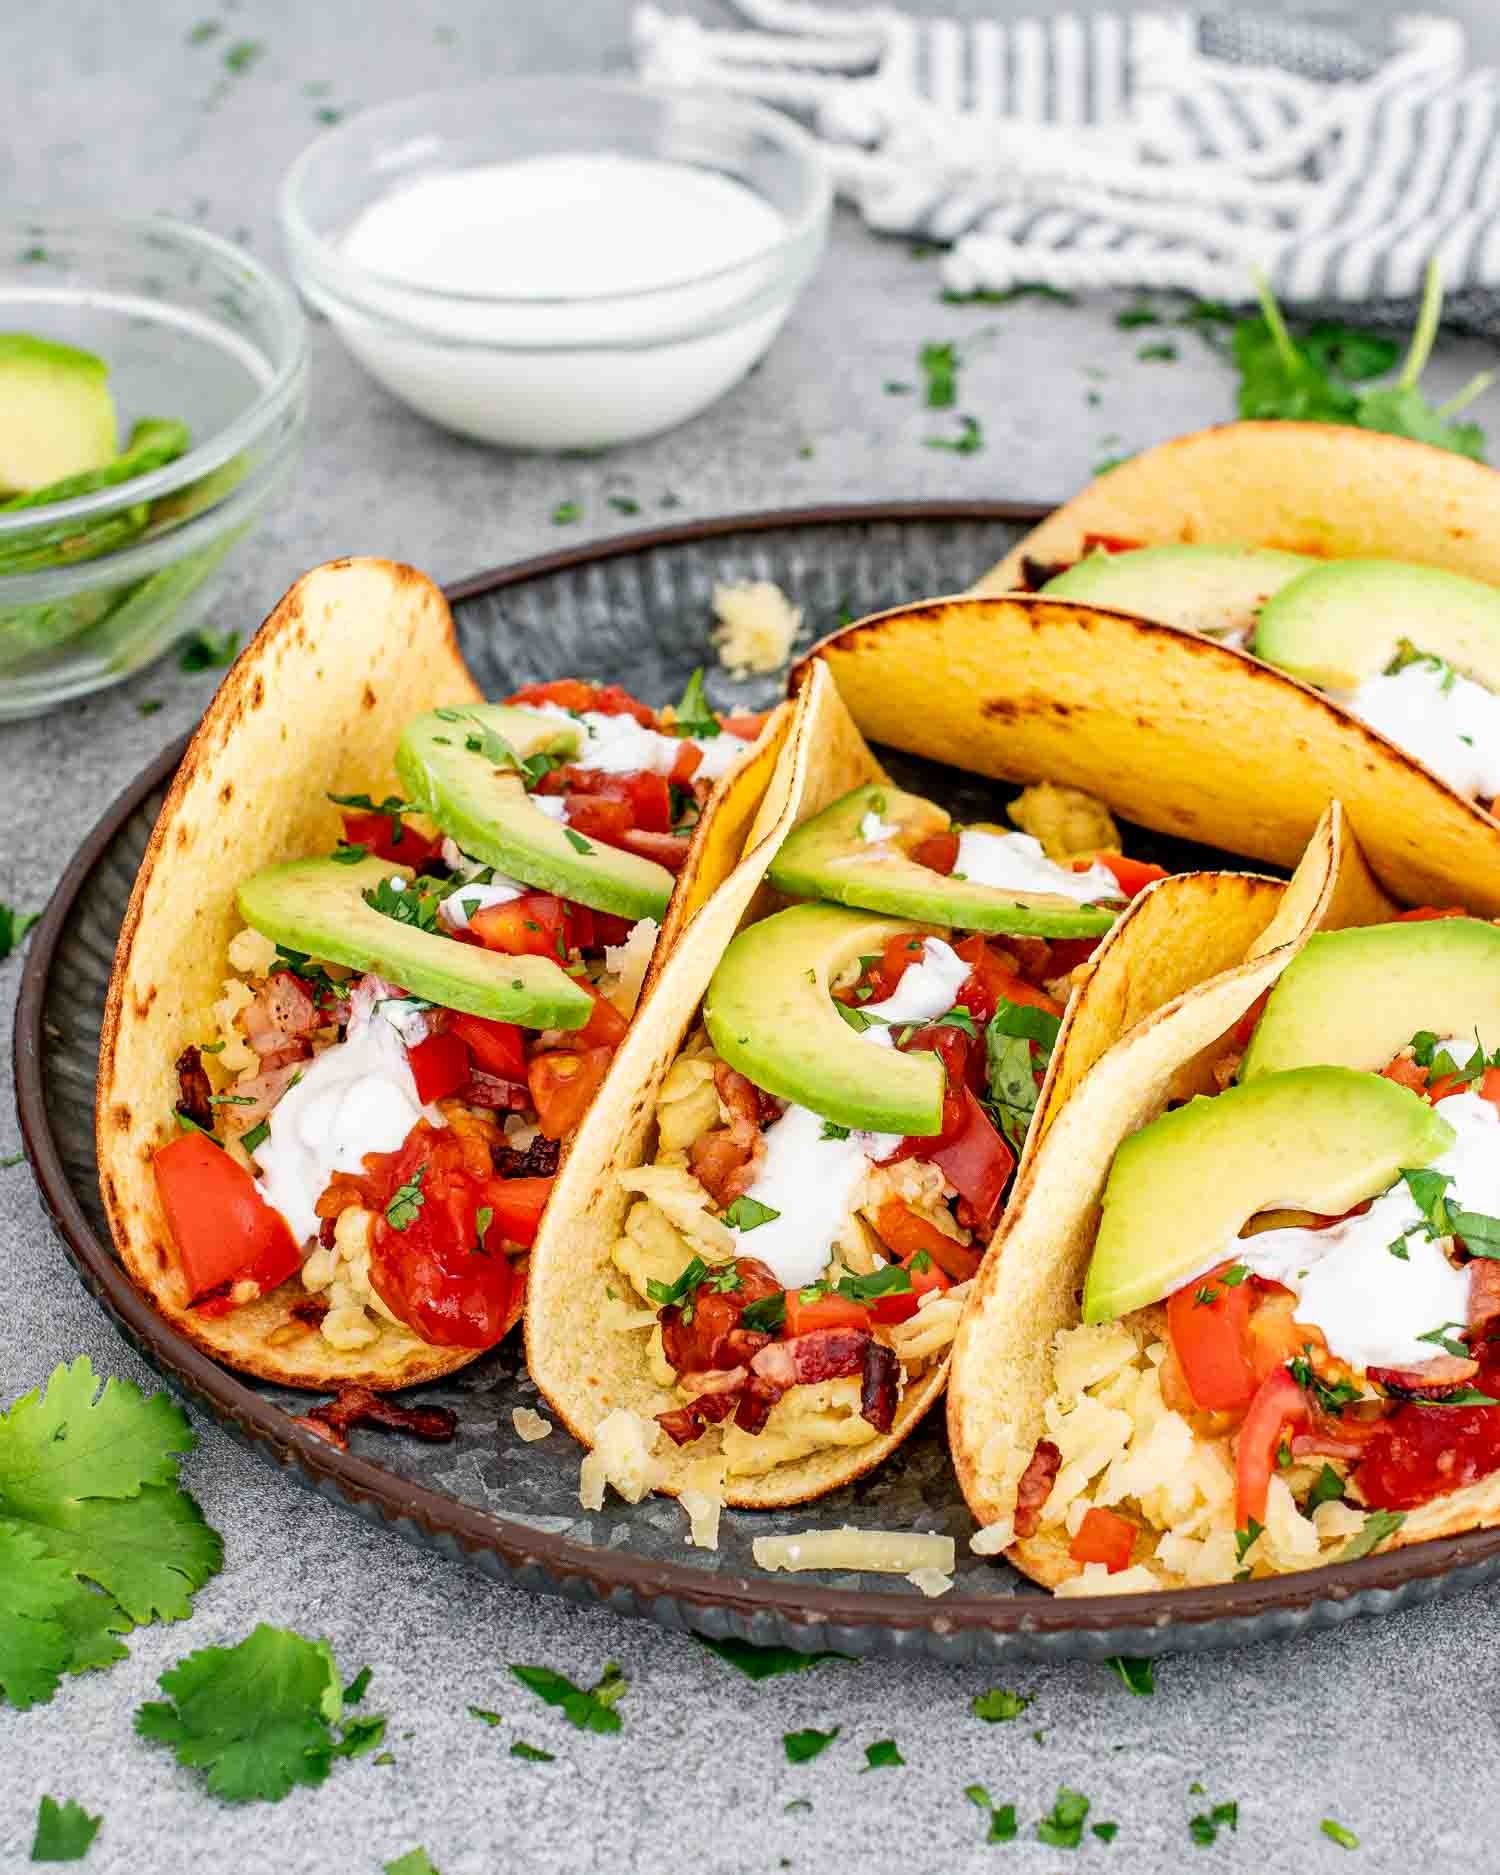 a plate with 4 tacos garnished with sour cream, salsa and avocados.